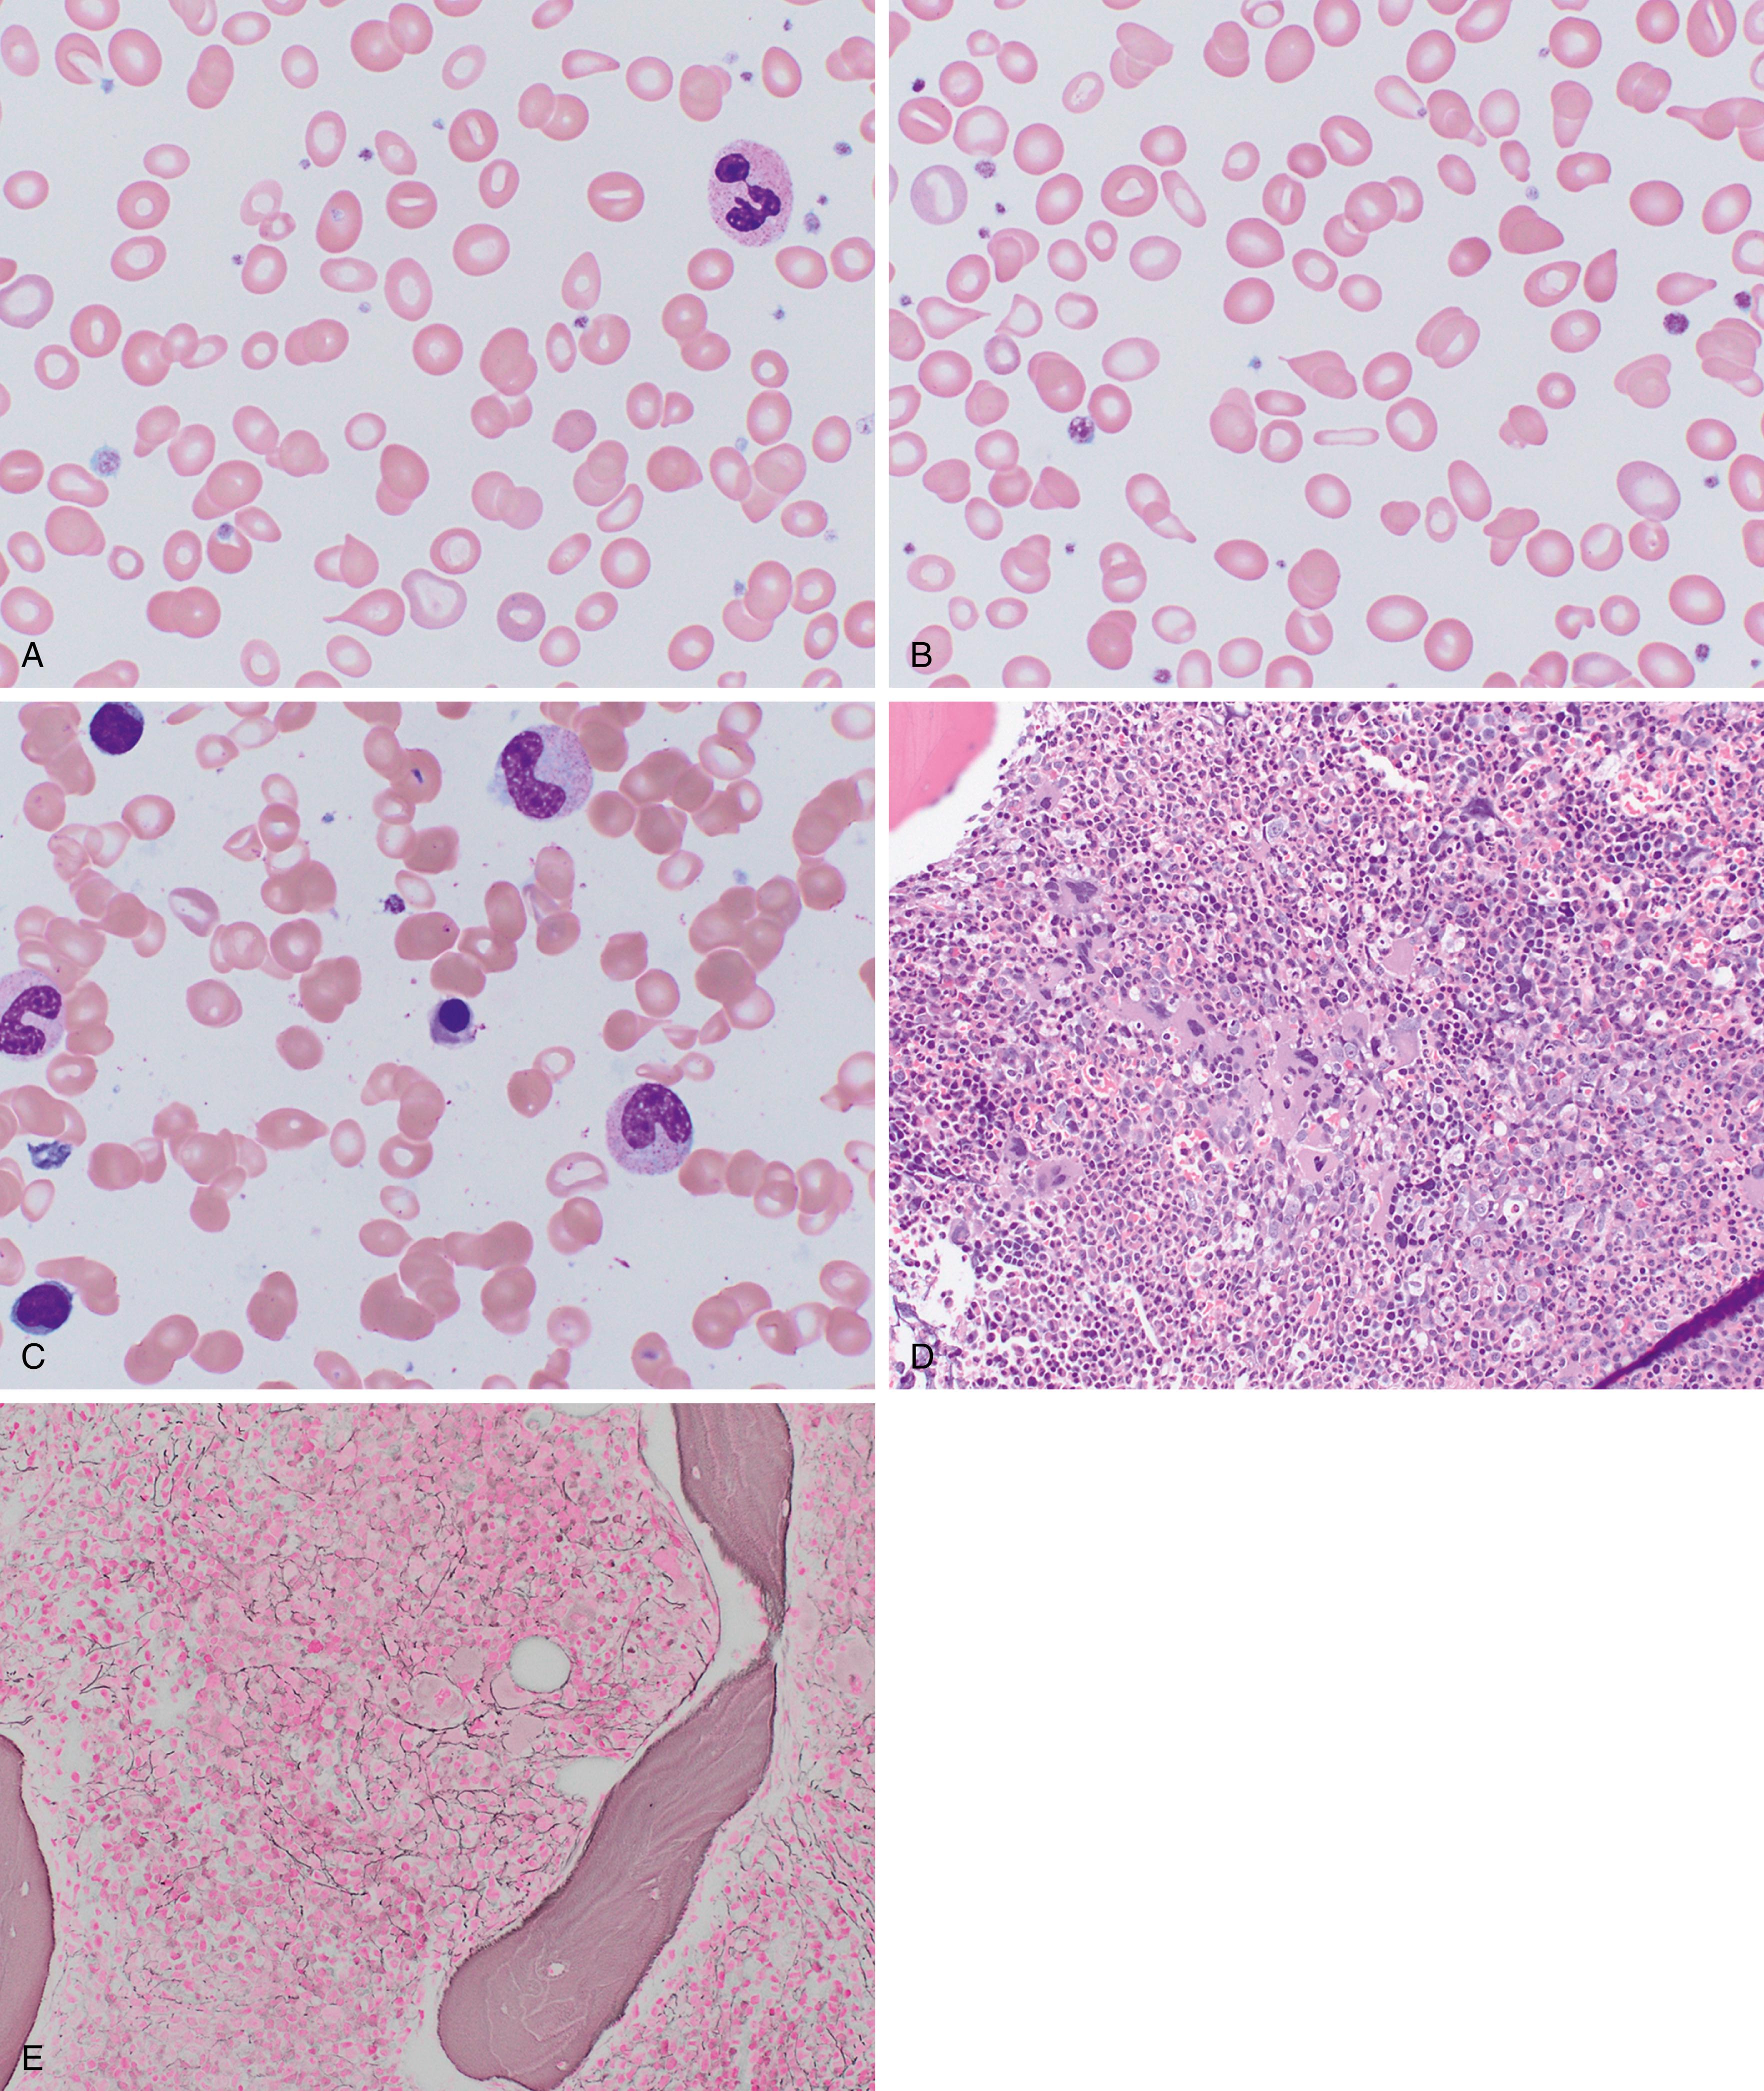 Fig. 3.2, Severe iron deficiency complicating the presentation of polycythemia vera, spent phase.